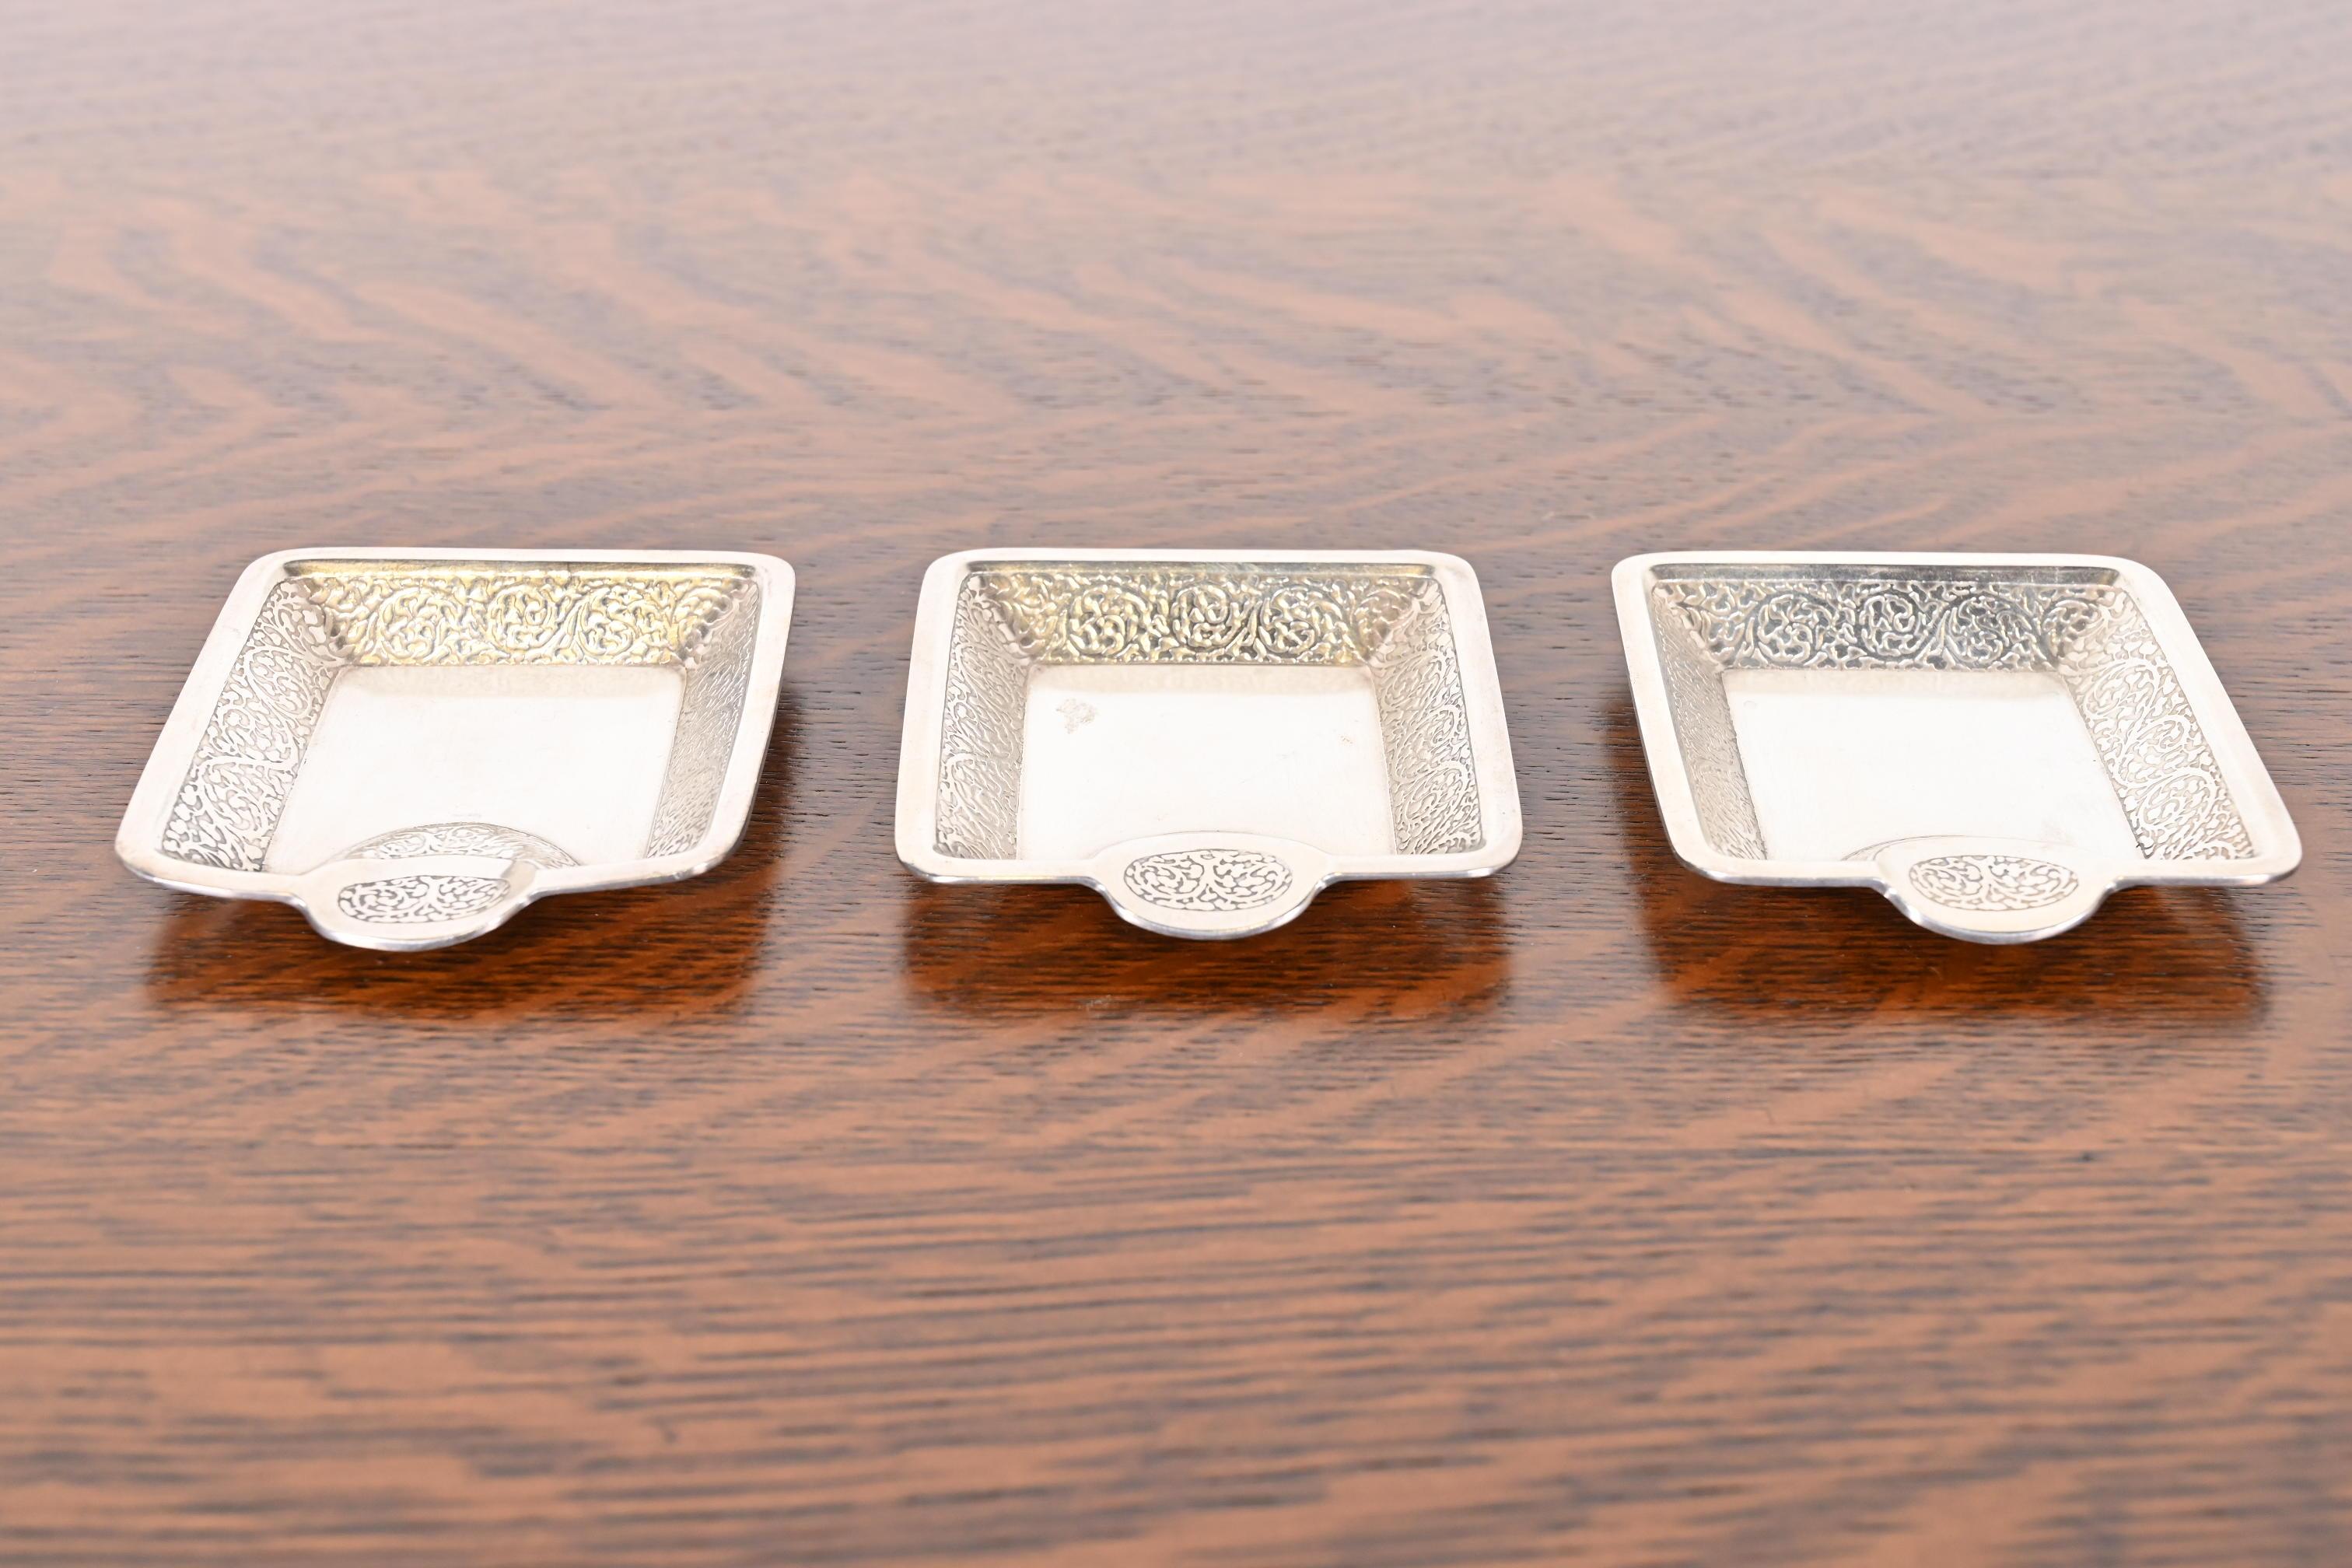 American Tiffany & Co. Art Deco Sterling Silver Ashtrays or Catchall Trays, Set of Three